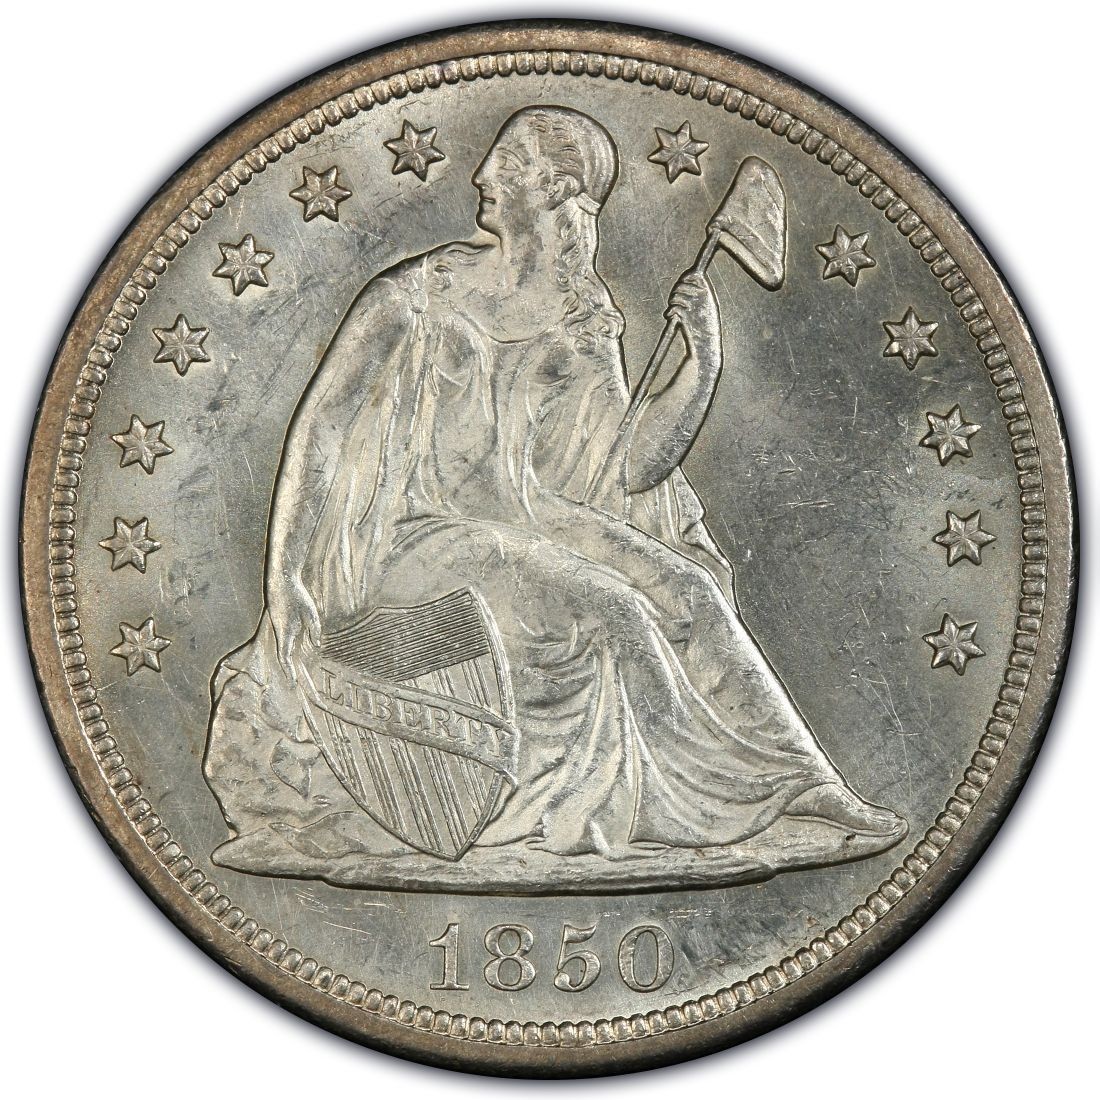 1850 Seated Liberty Silver Dollar Values and Prices - Past Sales | CoinValues.com